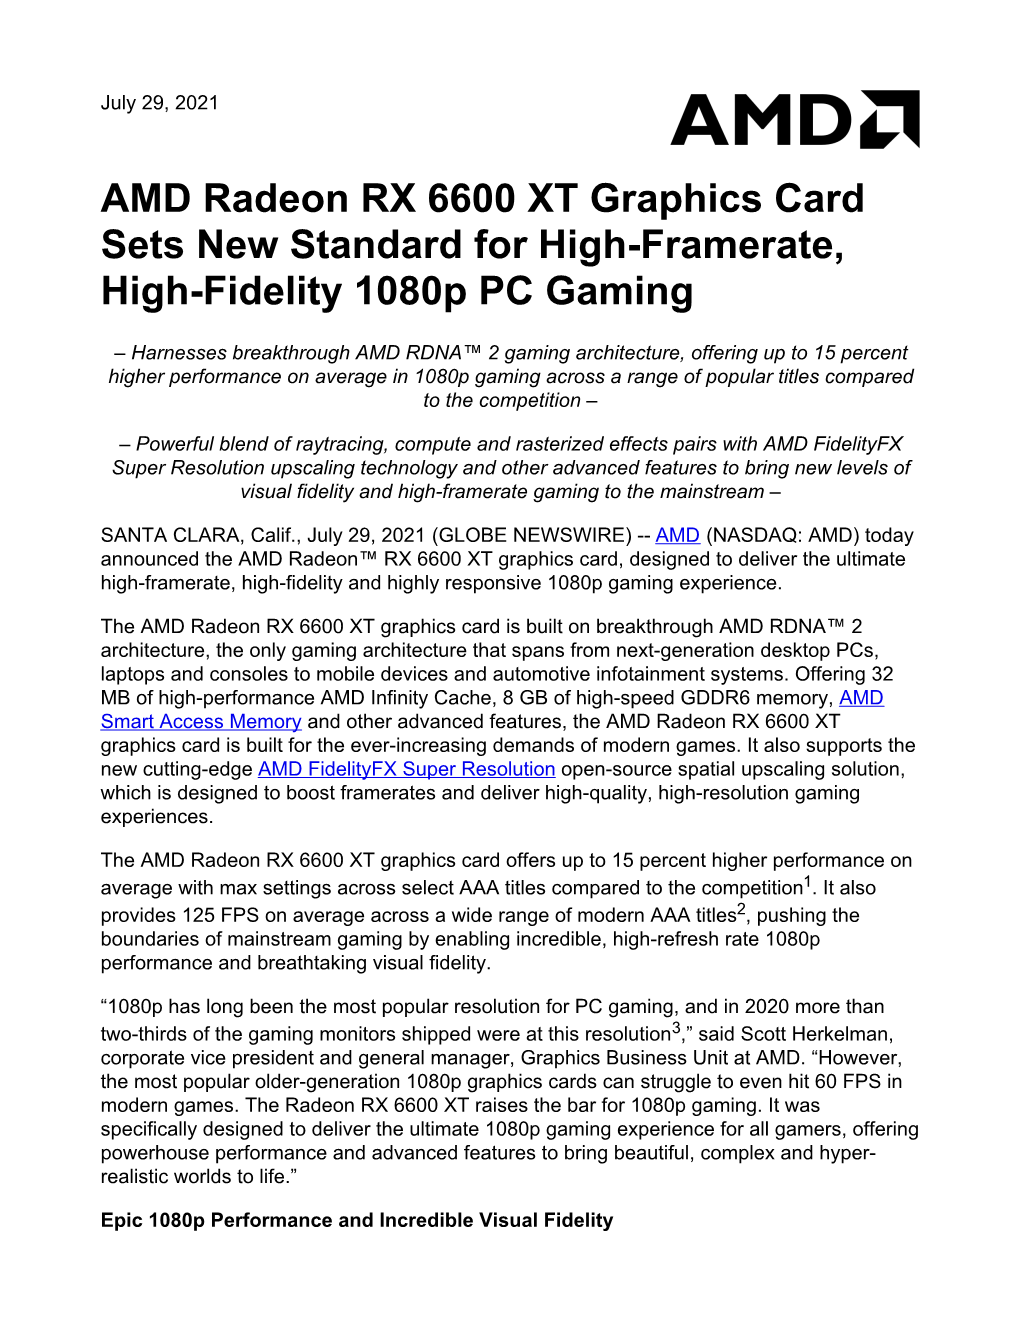 AMD Radeon RX 6600 XT Graphics Card Sets New Standard for High-Framerate, High-Fidelity 1080P PC Gaming